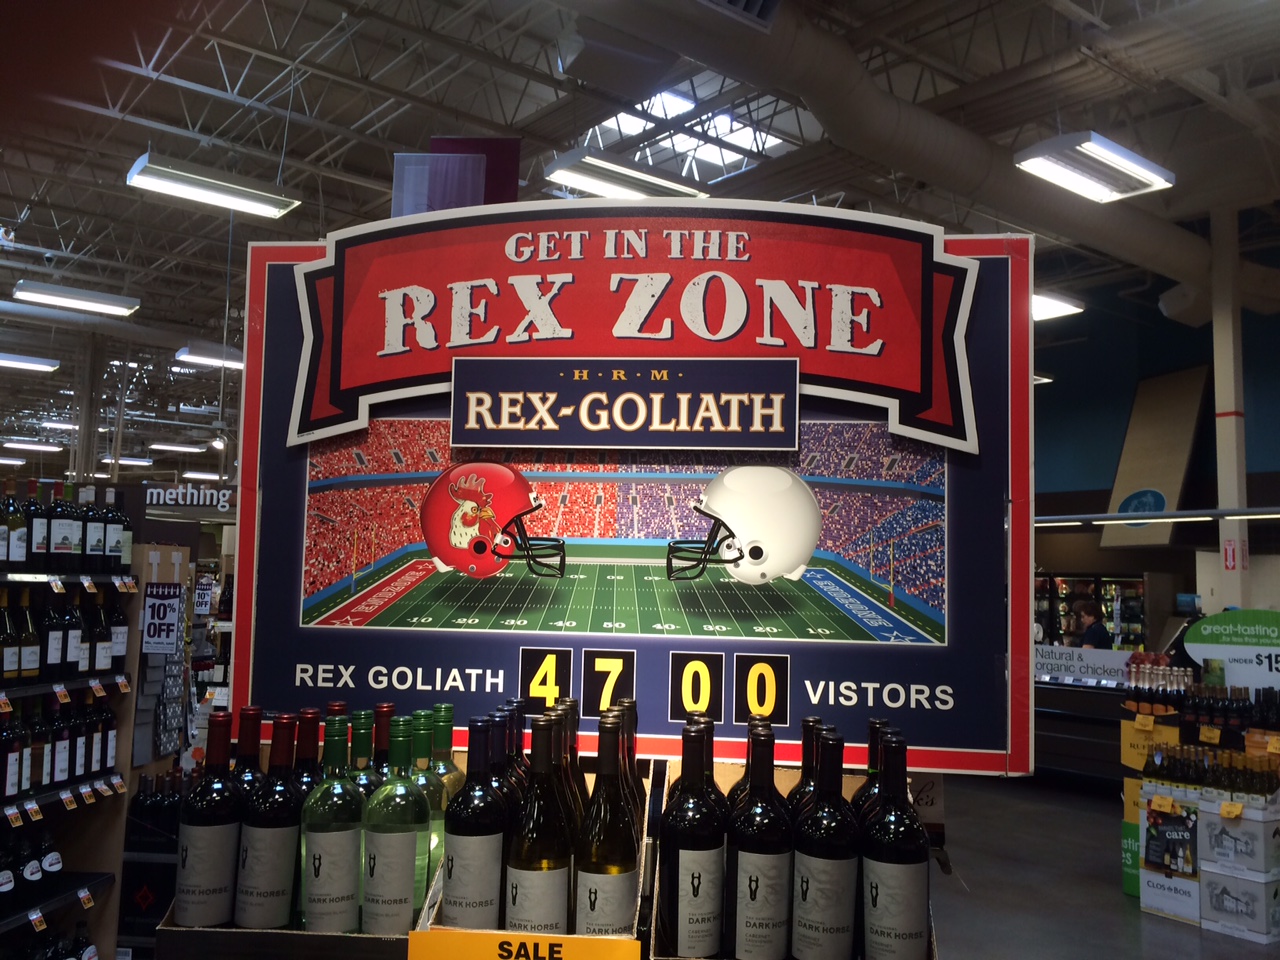 grocery store display for rex goliath wine